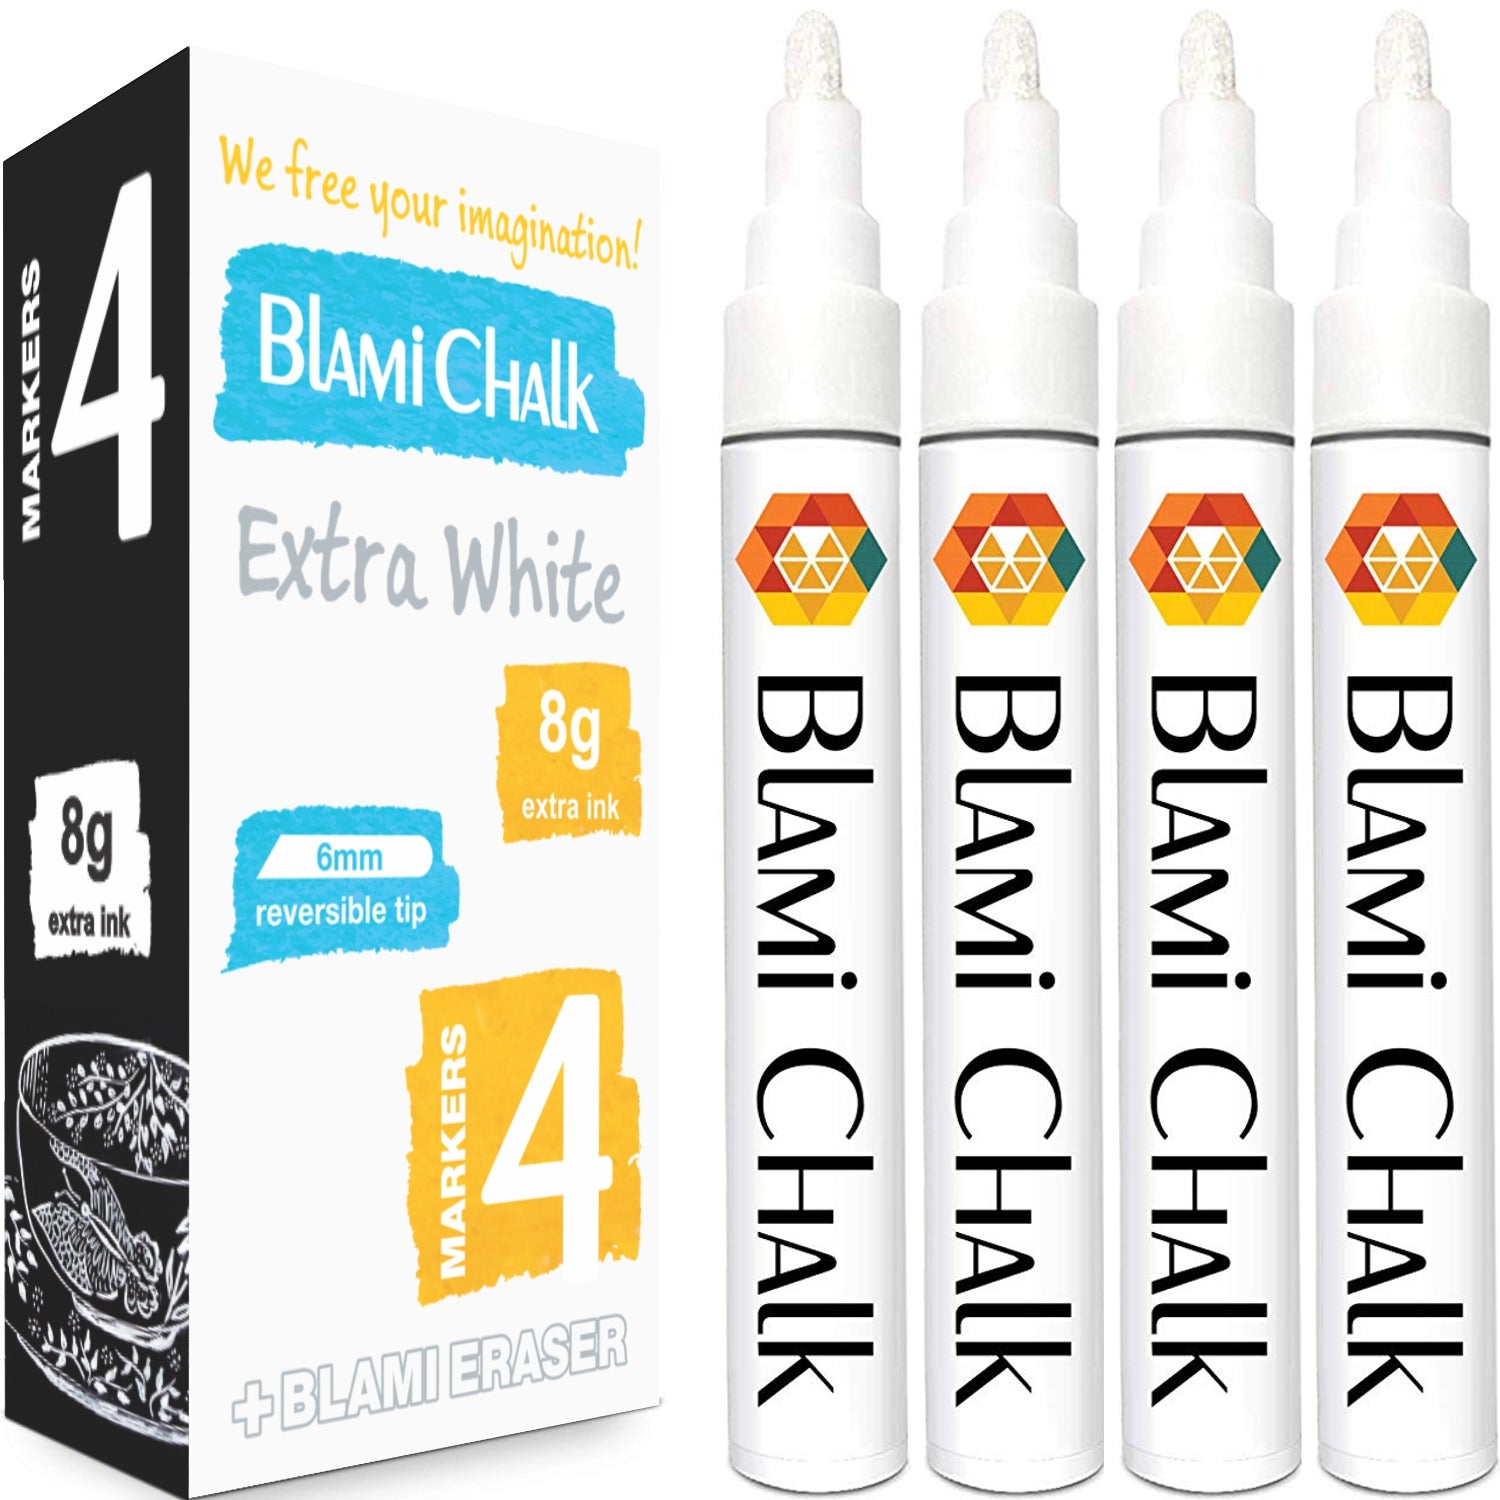  Blami Arts White Chalk Markers 4 Pack - Reversible Fine and  Jumbo Tips 16mm - 10mm - 6mm - 3mm - Chalkboard Pens for Bistro Glass  Windows - Eraser Sponge Included : Arts, Crafts & Sewing